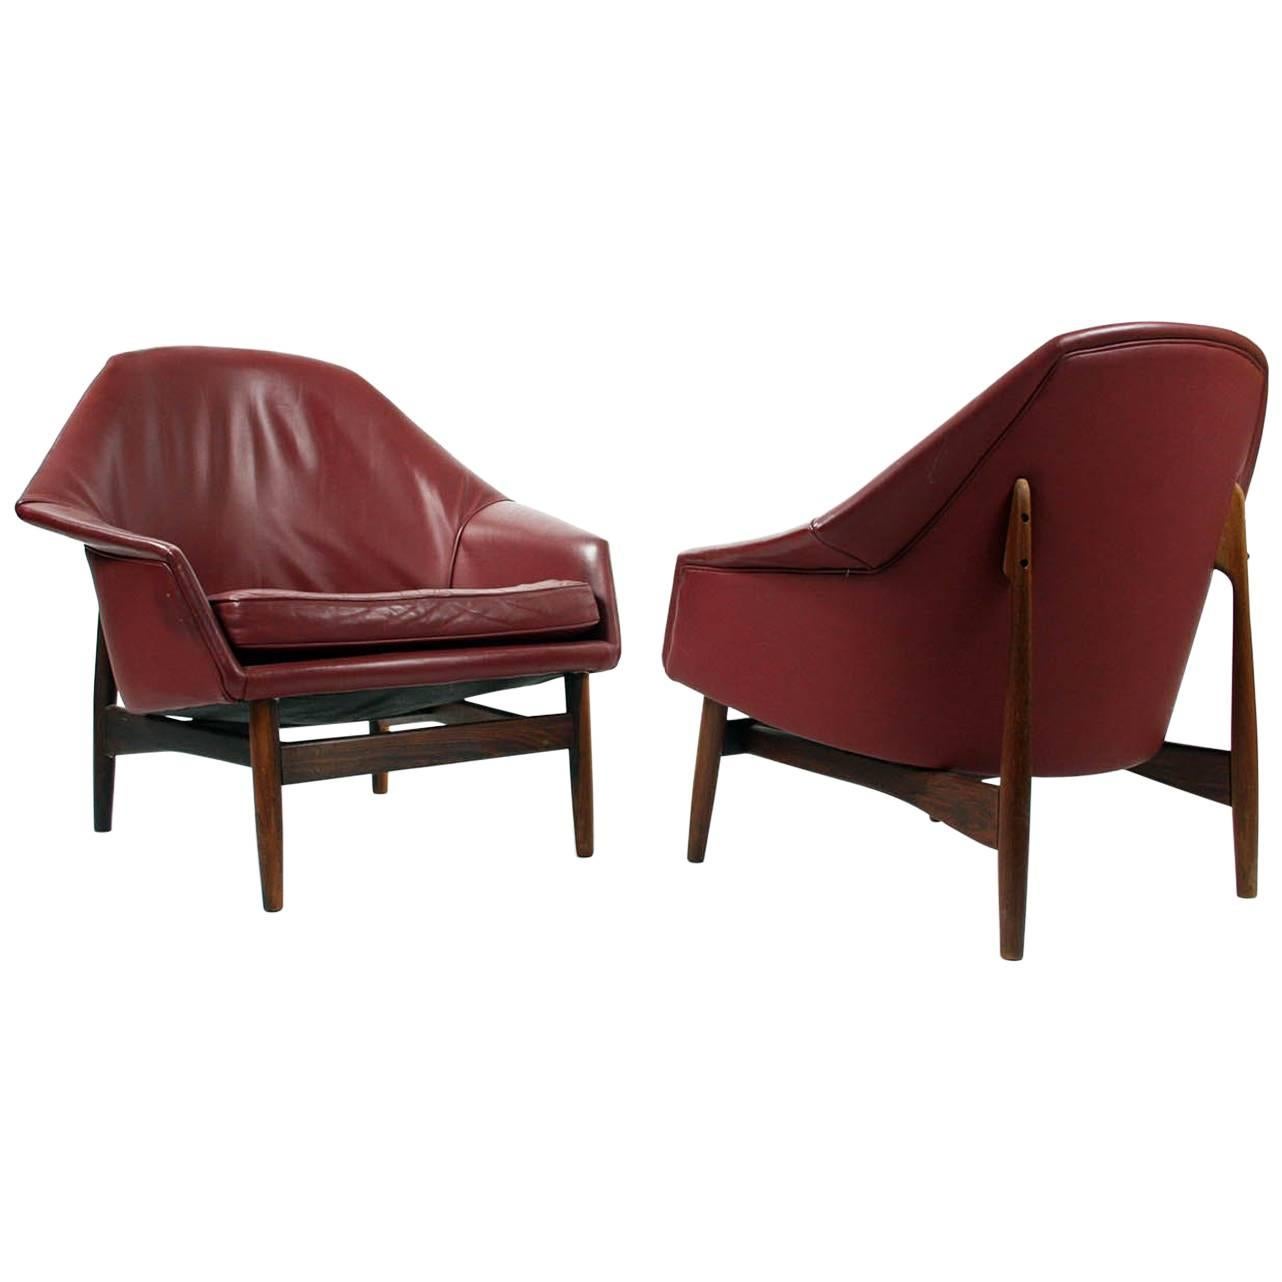 Pair of Rosewood and Leather Lounge Chairs by Ib Kofod Larsen for Carlo Gahrn